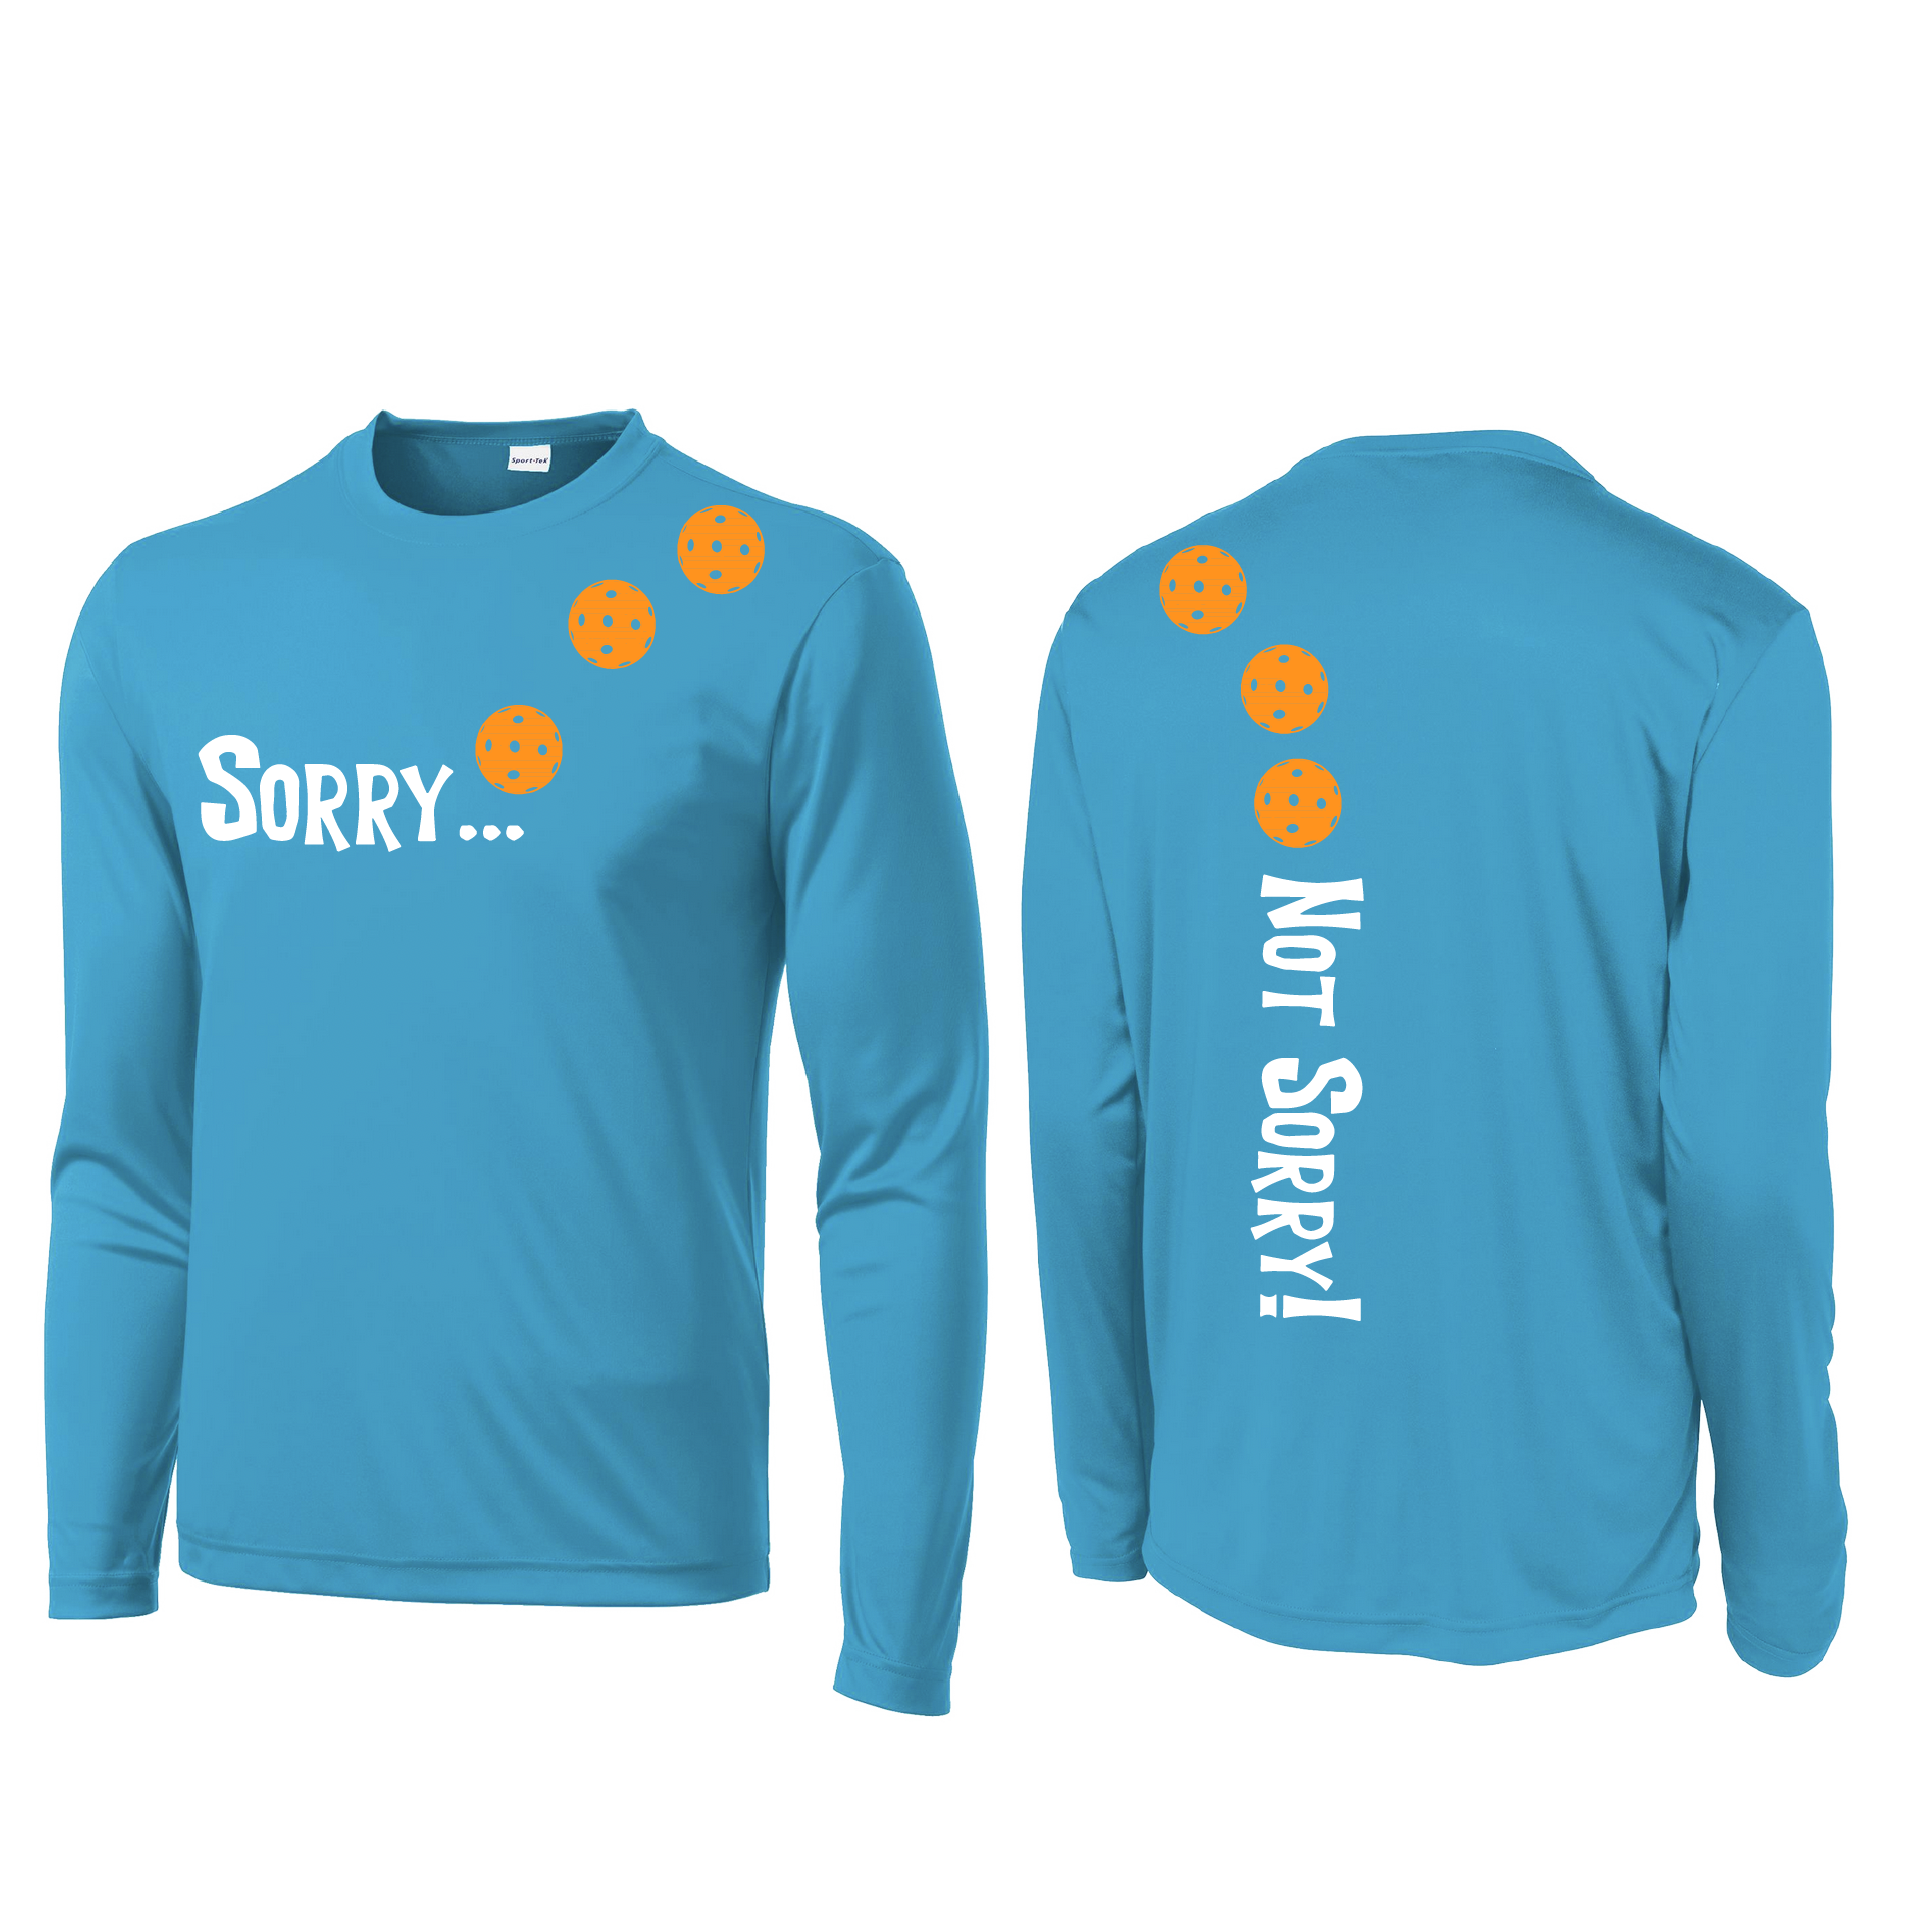 Design: Sorry...Not Sorry! with Customizable Ball Color - Choose: Green, Orange or Purple.  Men's Styles: Long-Sleeve .  Shirts are lightweight, roomy and highly breathable. These moisture-wicking shirts are designed for athletic performance. They feature PosiCharge technology to lock in color and prevent logos from fading. Removable tag and set-in sleeves for comfort.